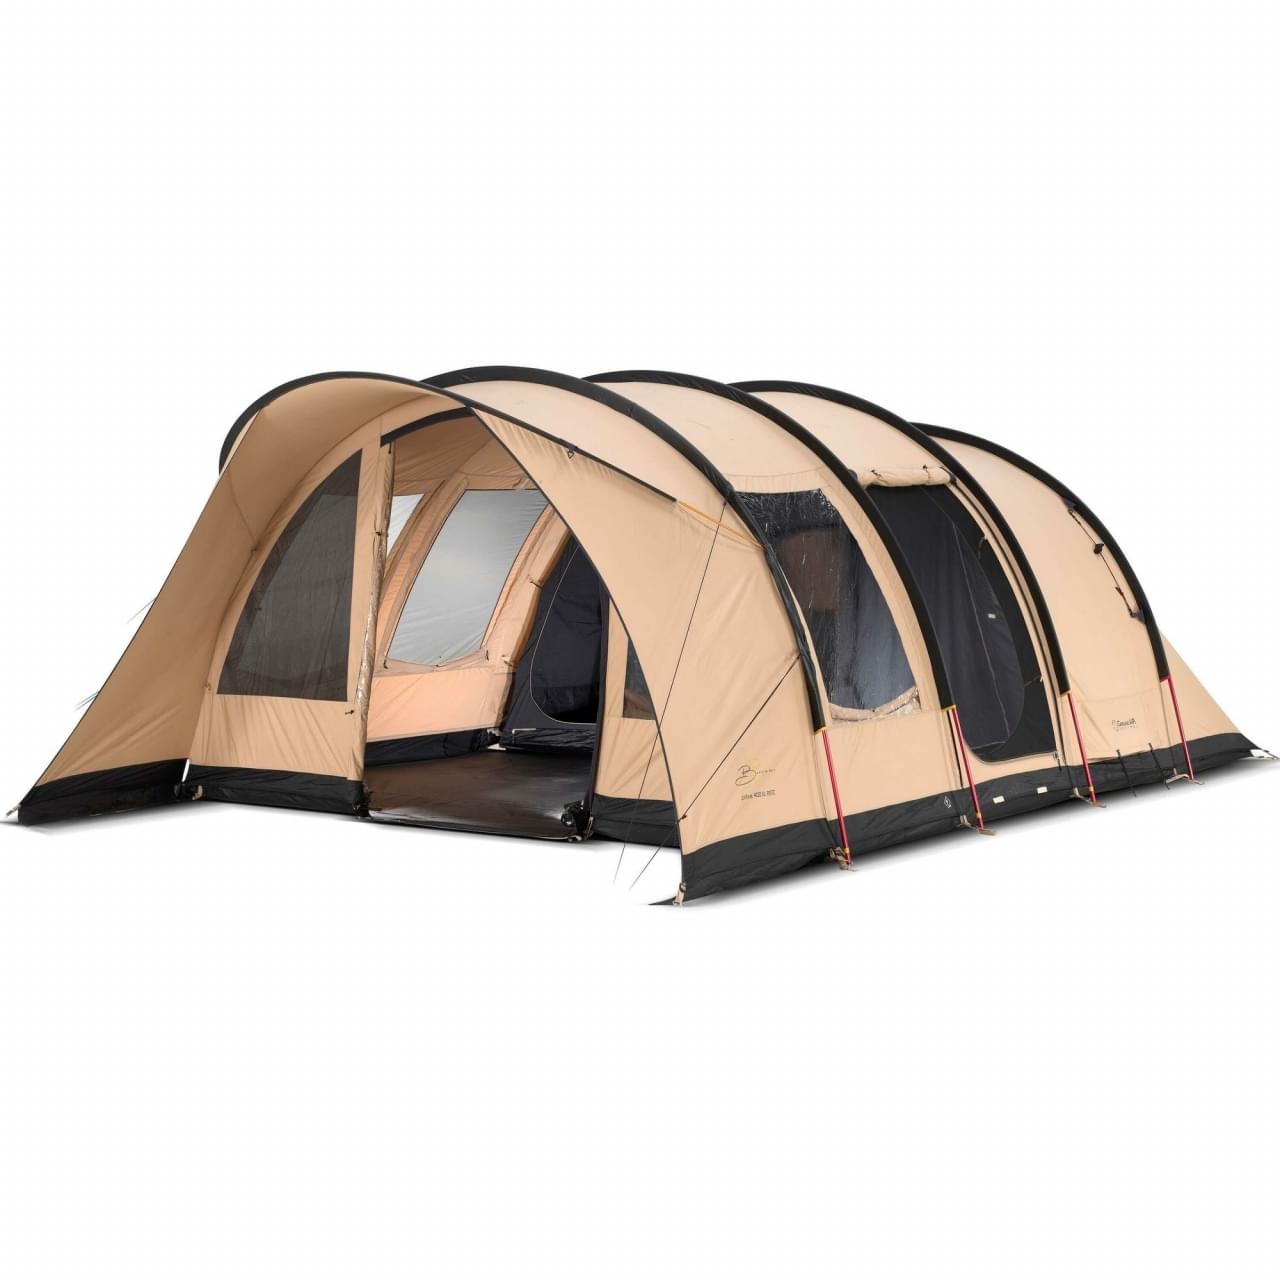 Bardani Spitfire 400 XL RSTC - 5 Persoons Tent